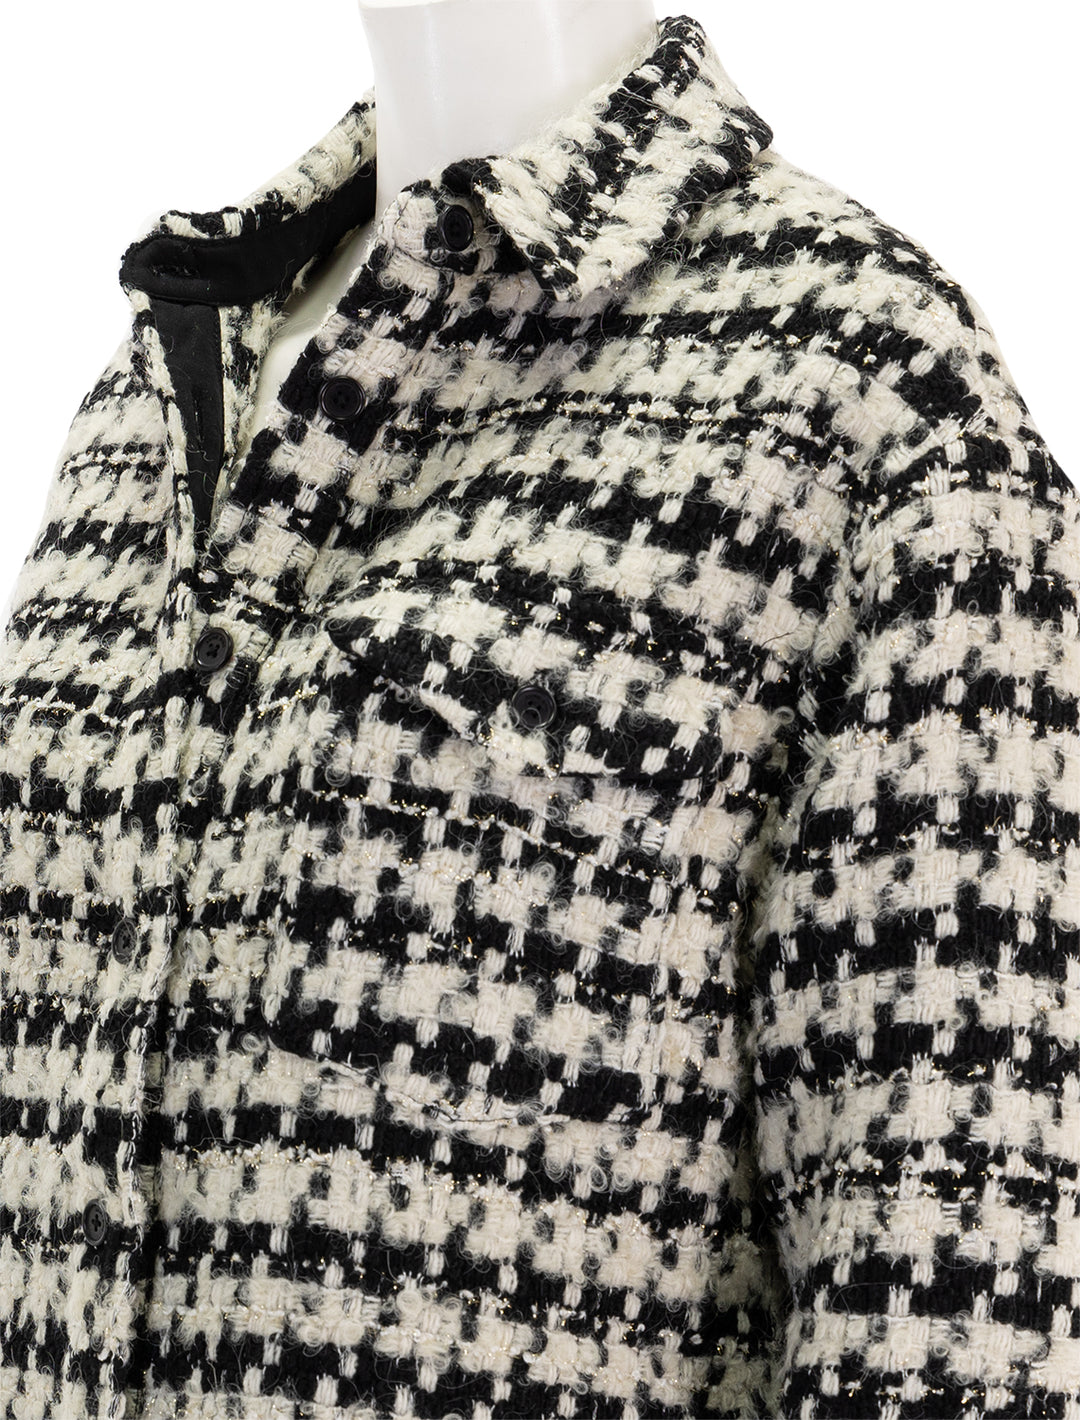 Close-up view of Anine Bing's sloan jacket in black and white.